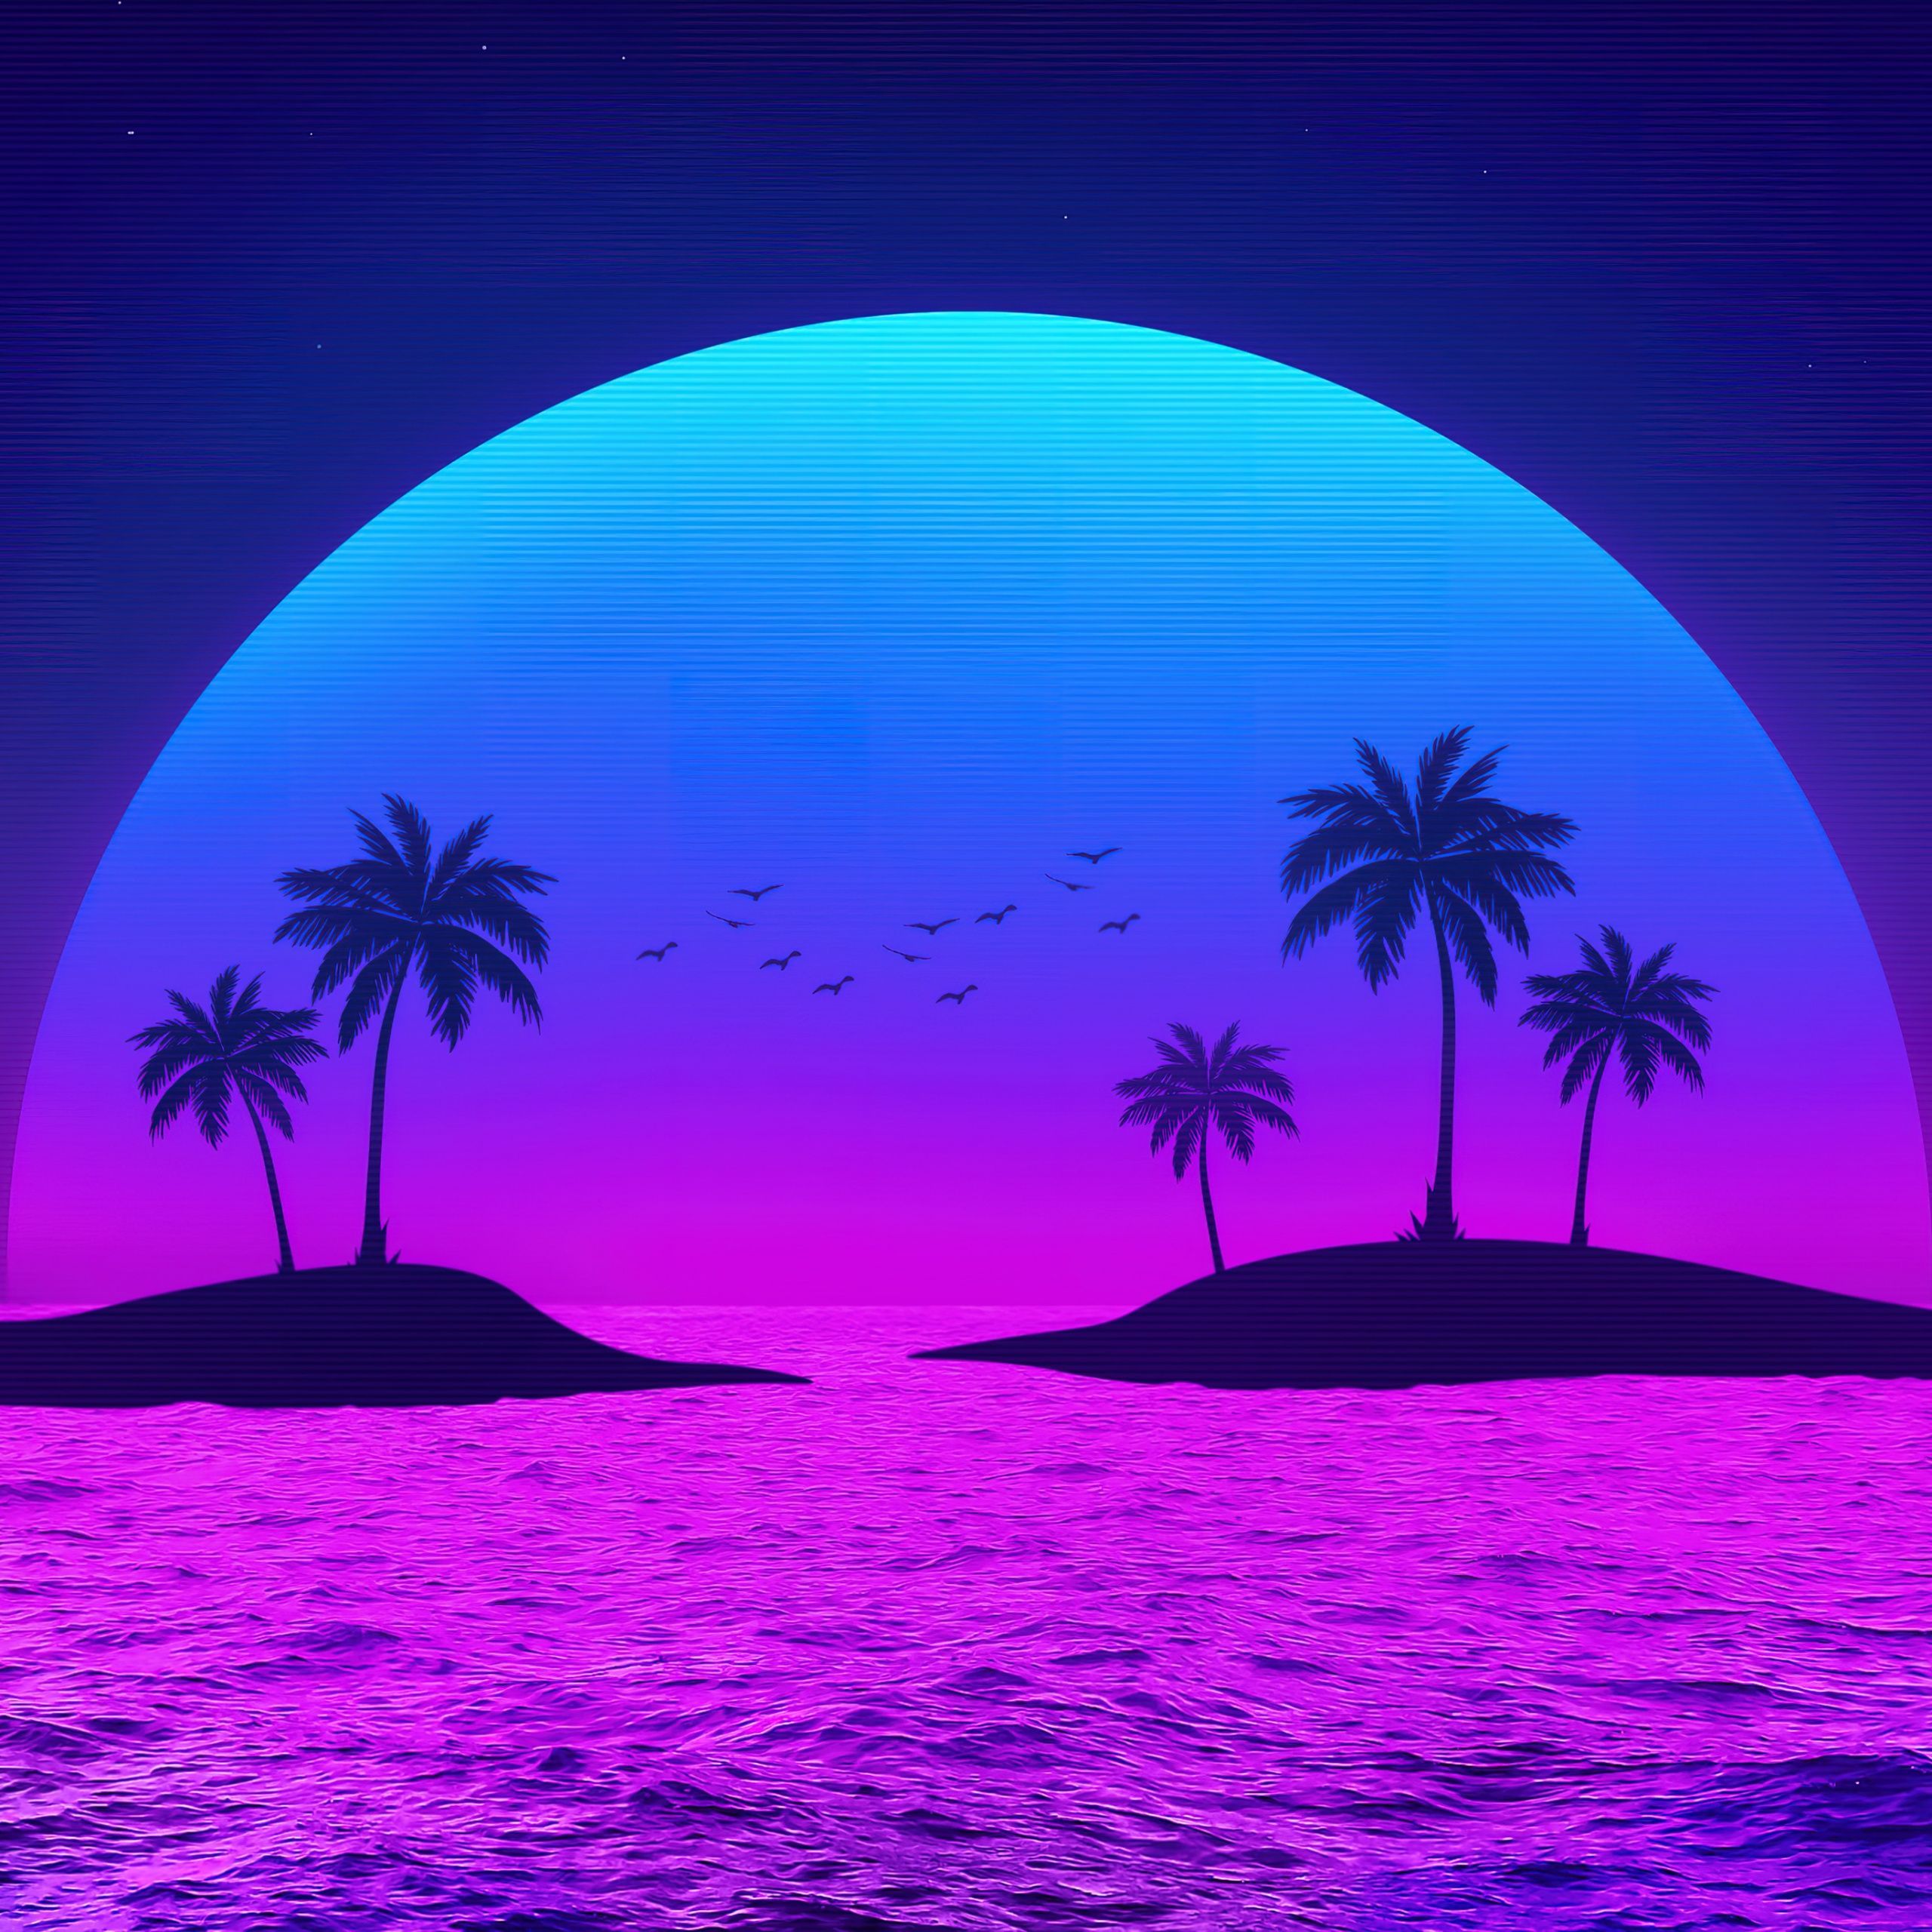 A purple and pink sunset with palm trees - Tropical